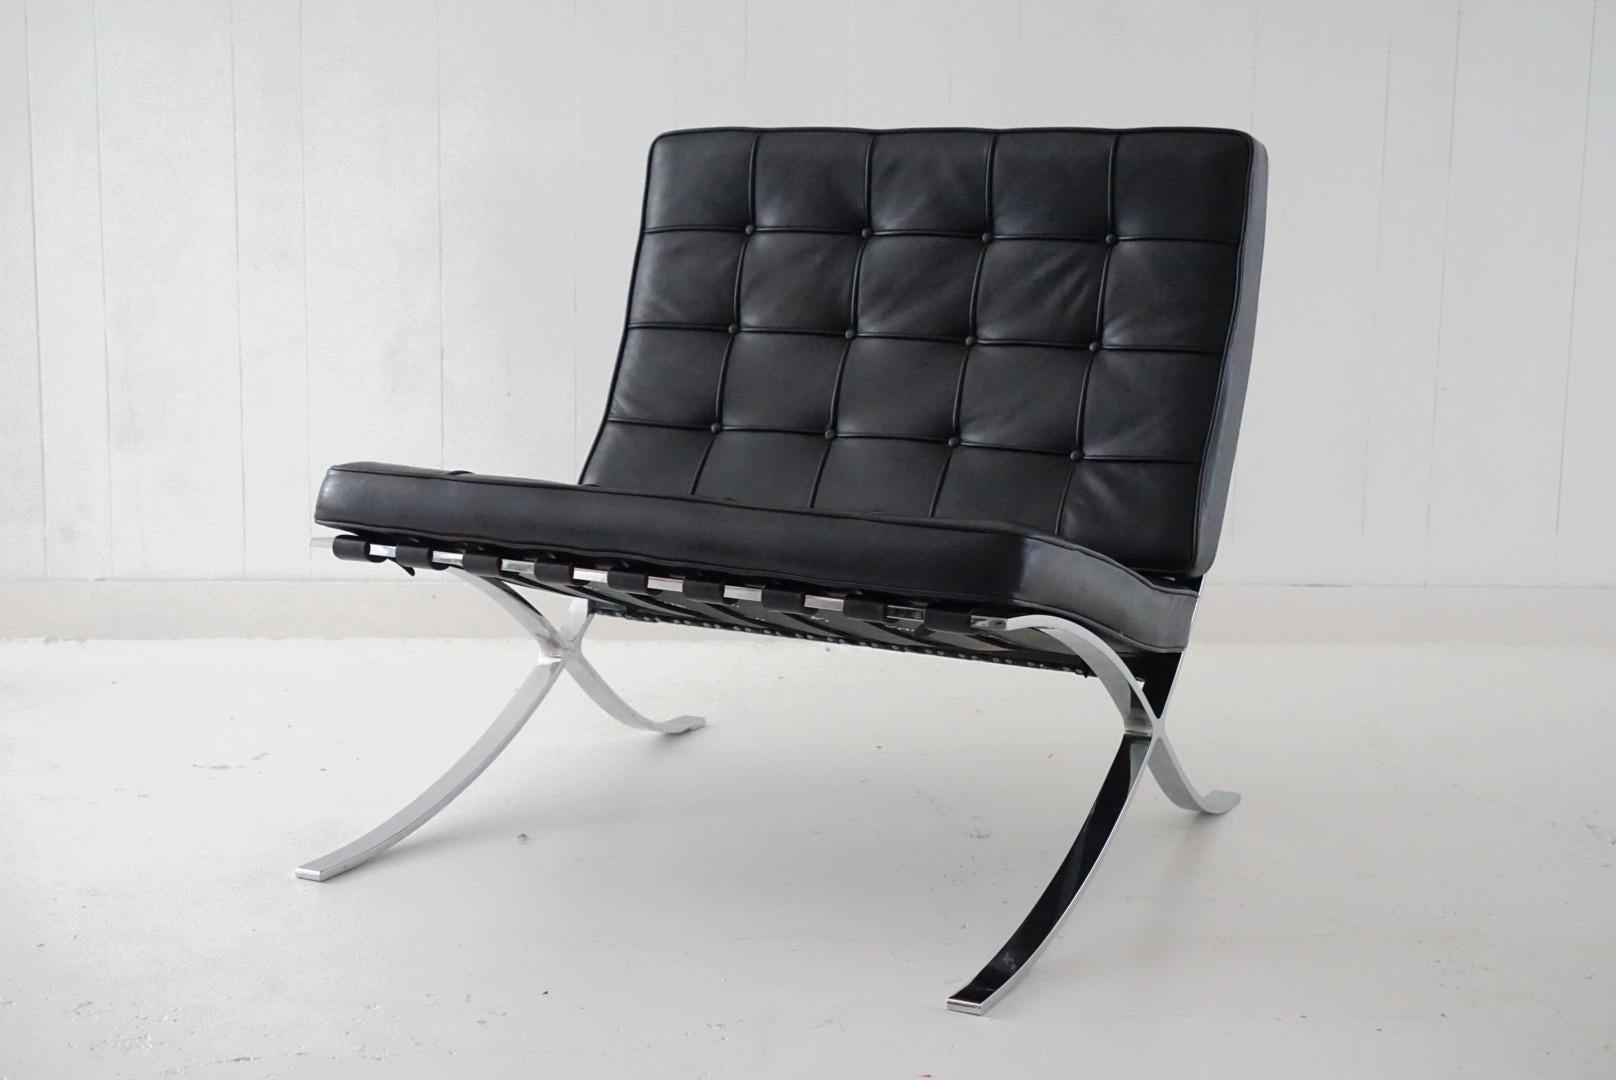 Pair of Barcelona Lounge Chairs by Mies van der Rohe for Knoll Studios, Signed 4